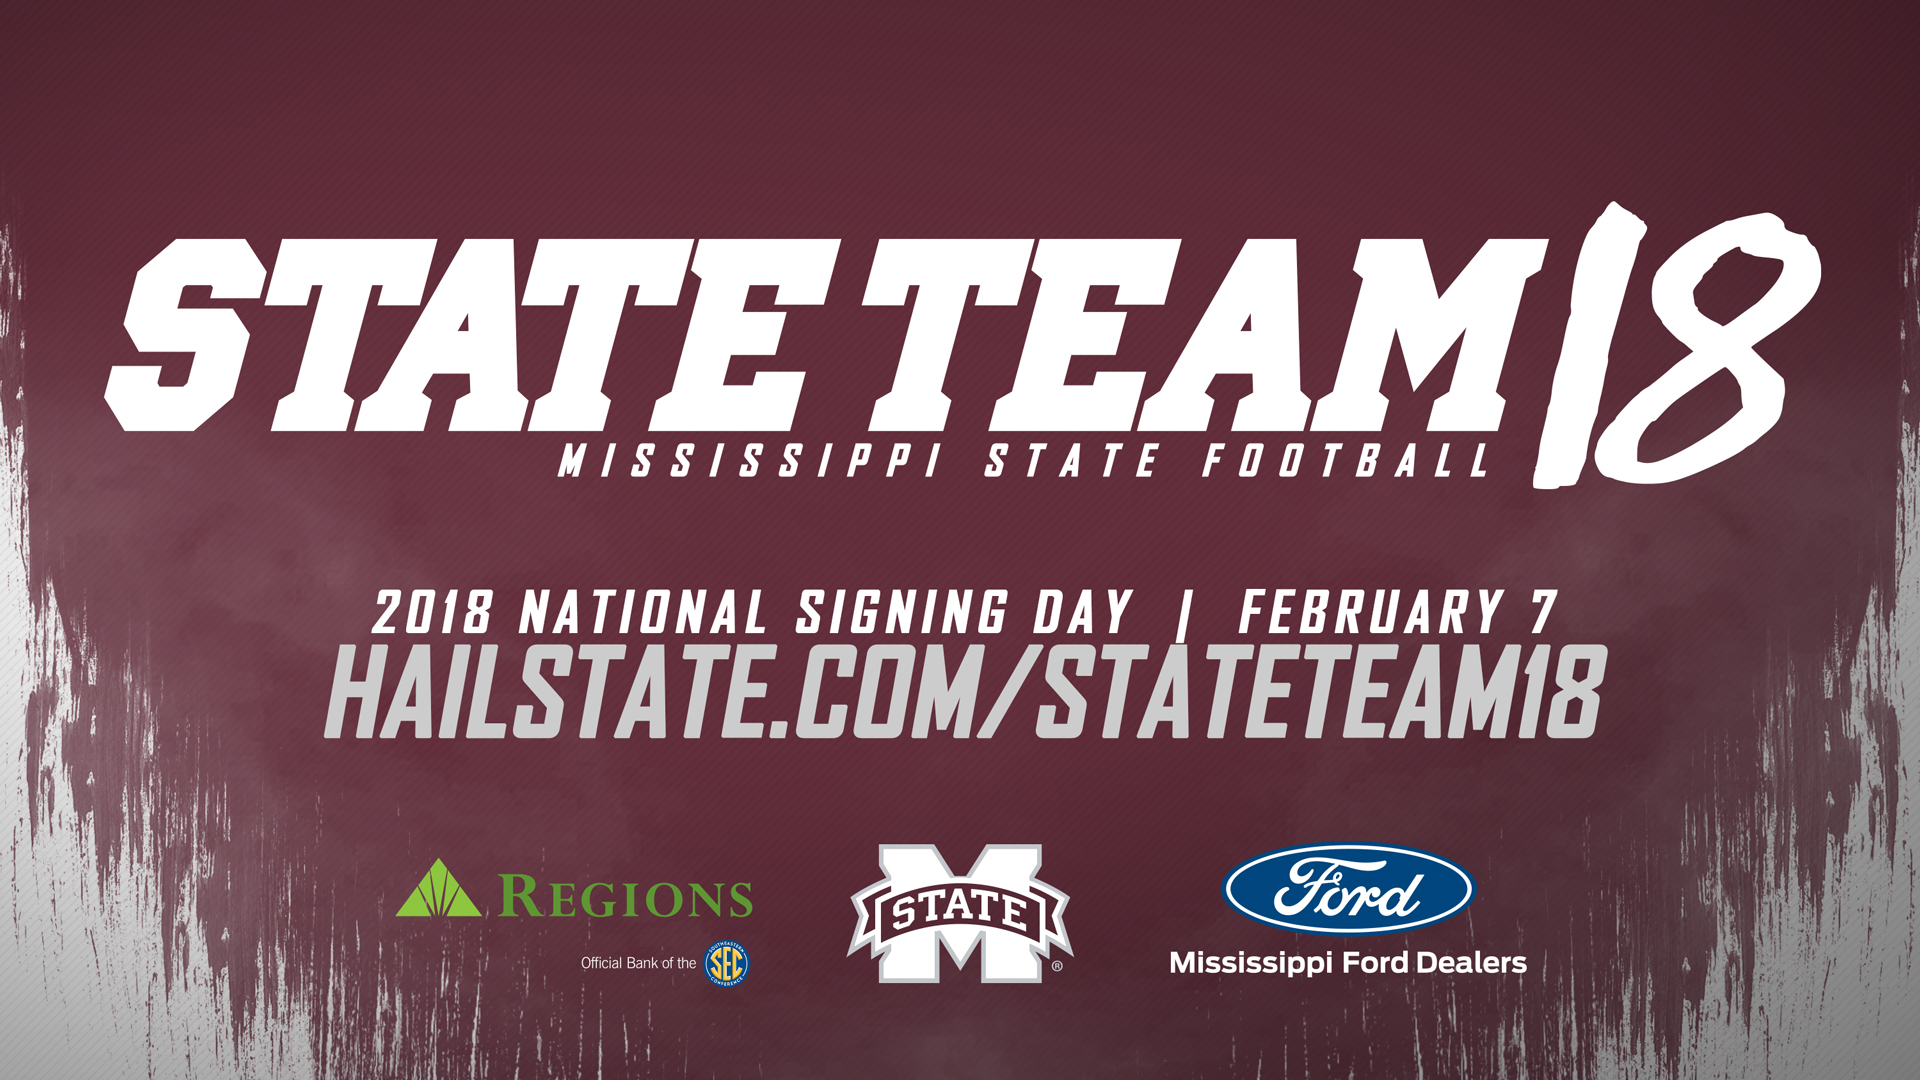 Stateteam18 Takes Center Stage On National Signing Day